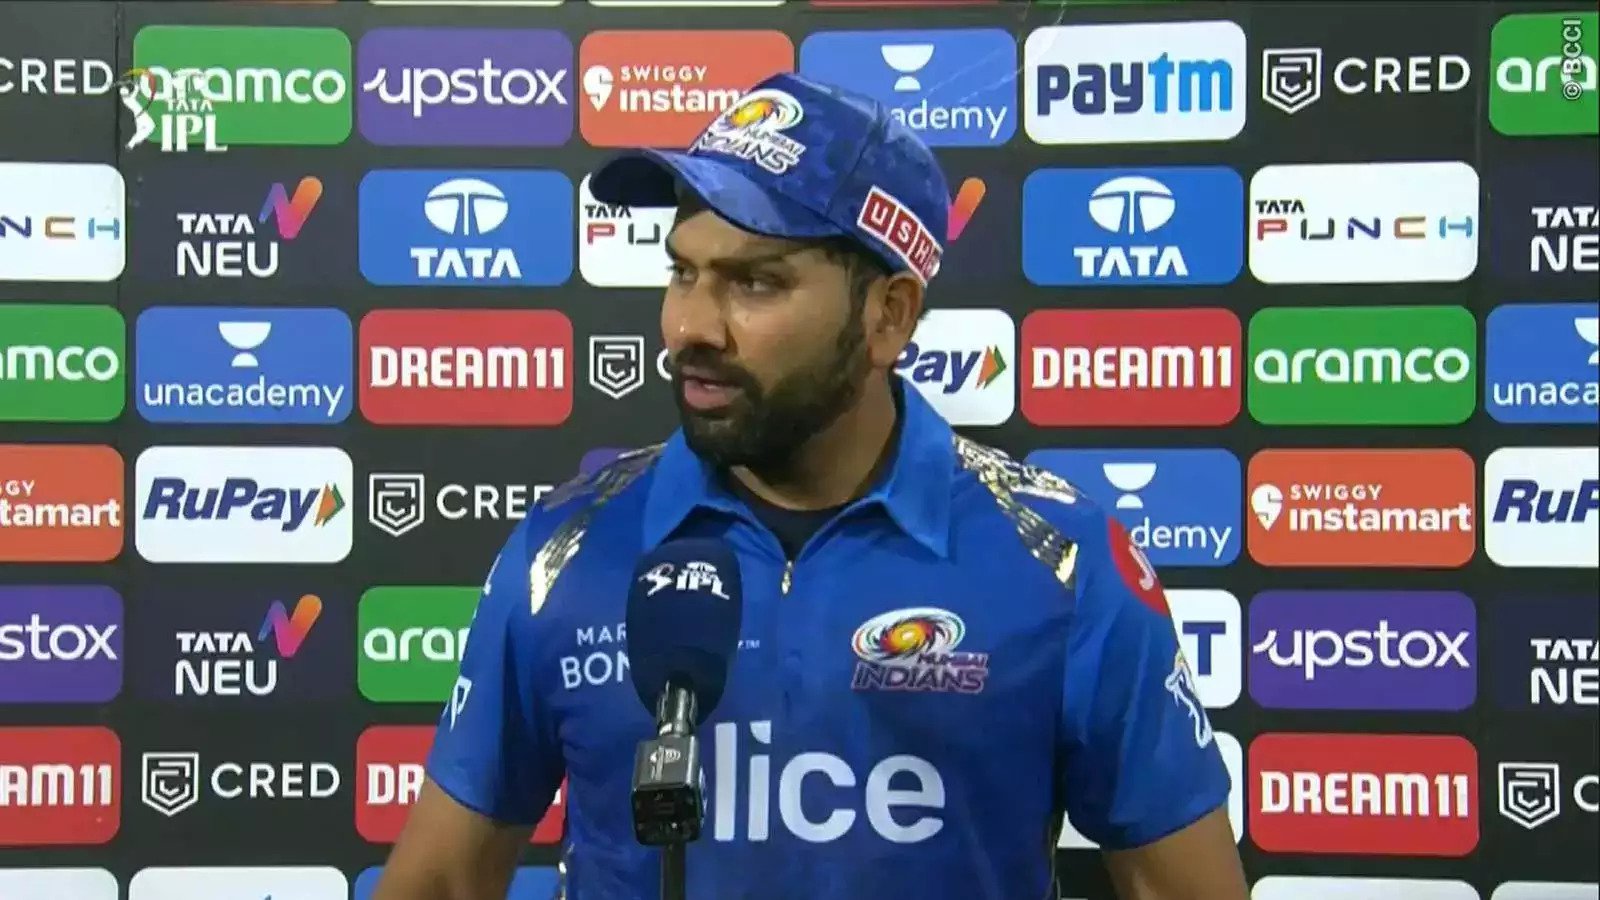 [Watch] “Awaaz Badhao Yaar” – Frustrated Rohit Sharma Hits Out After Losing vs KKR